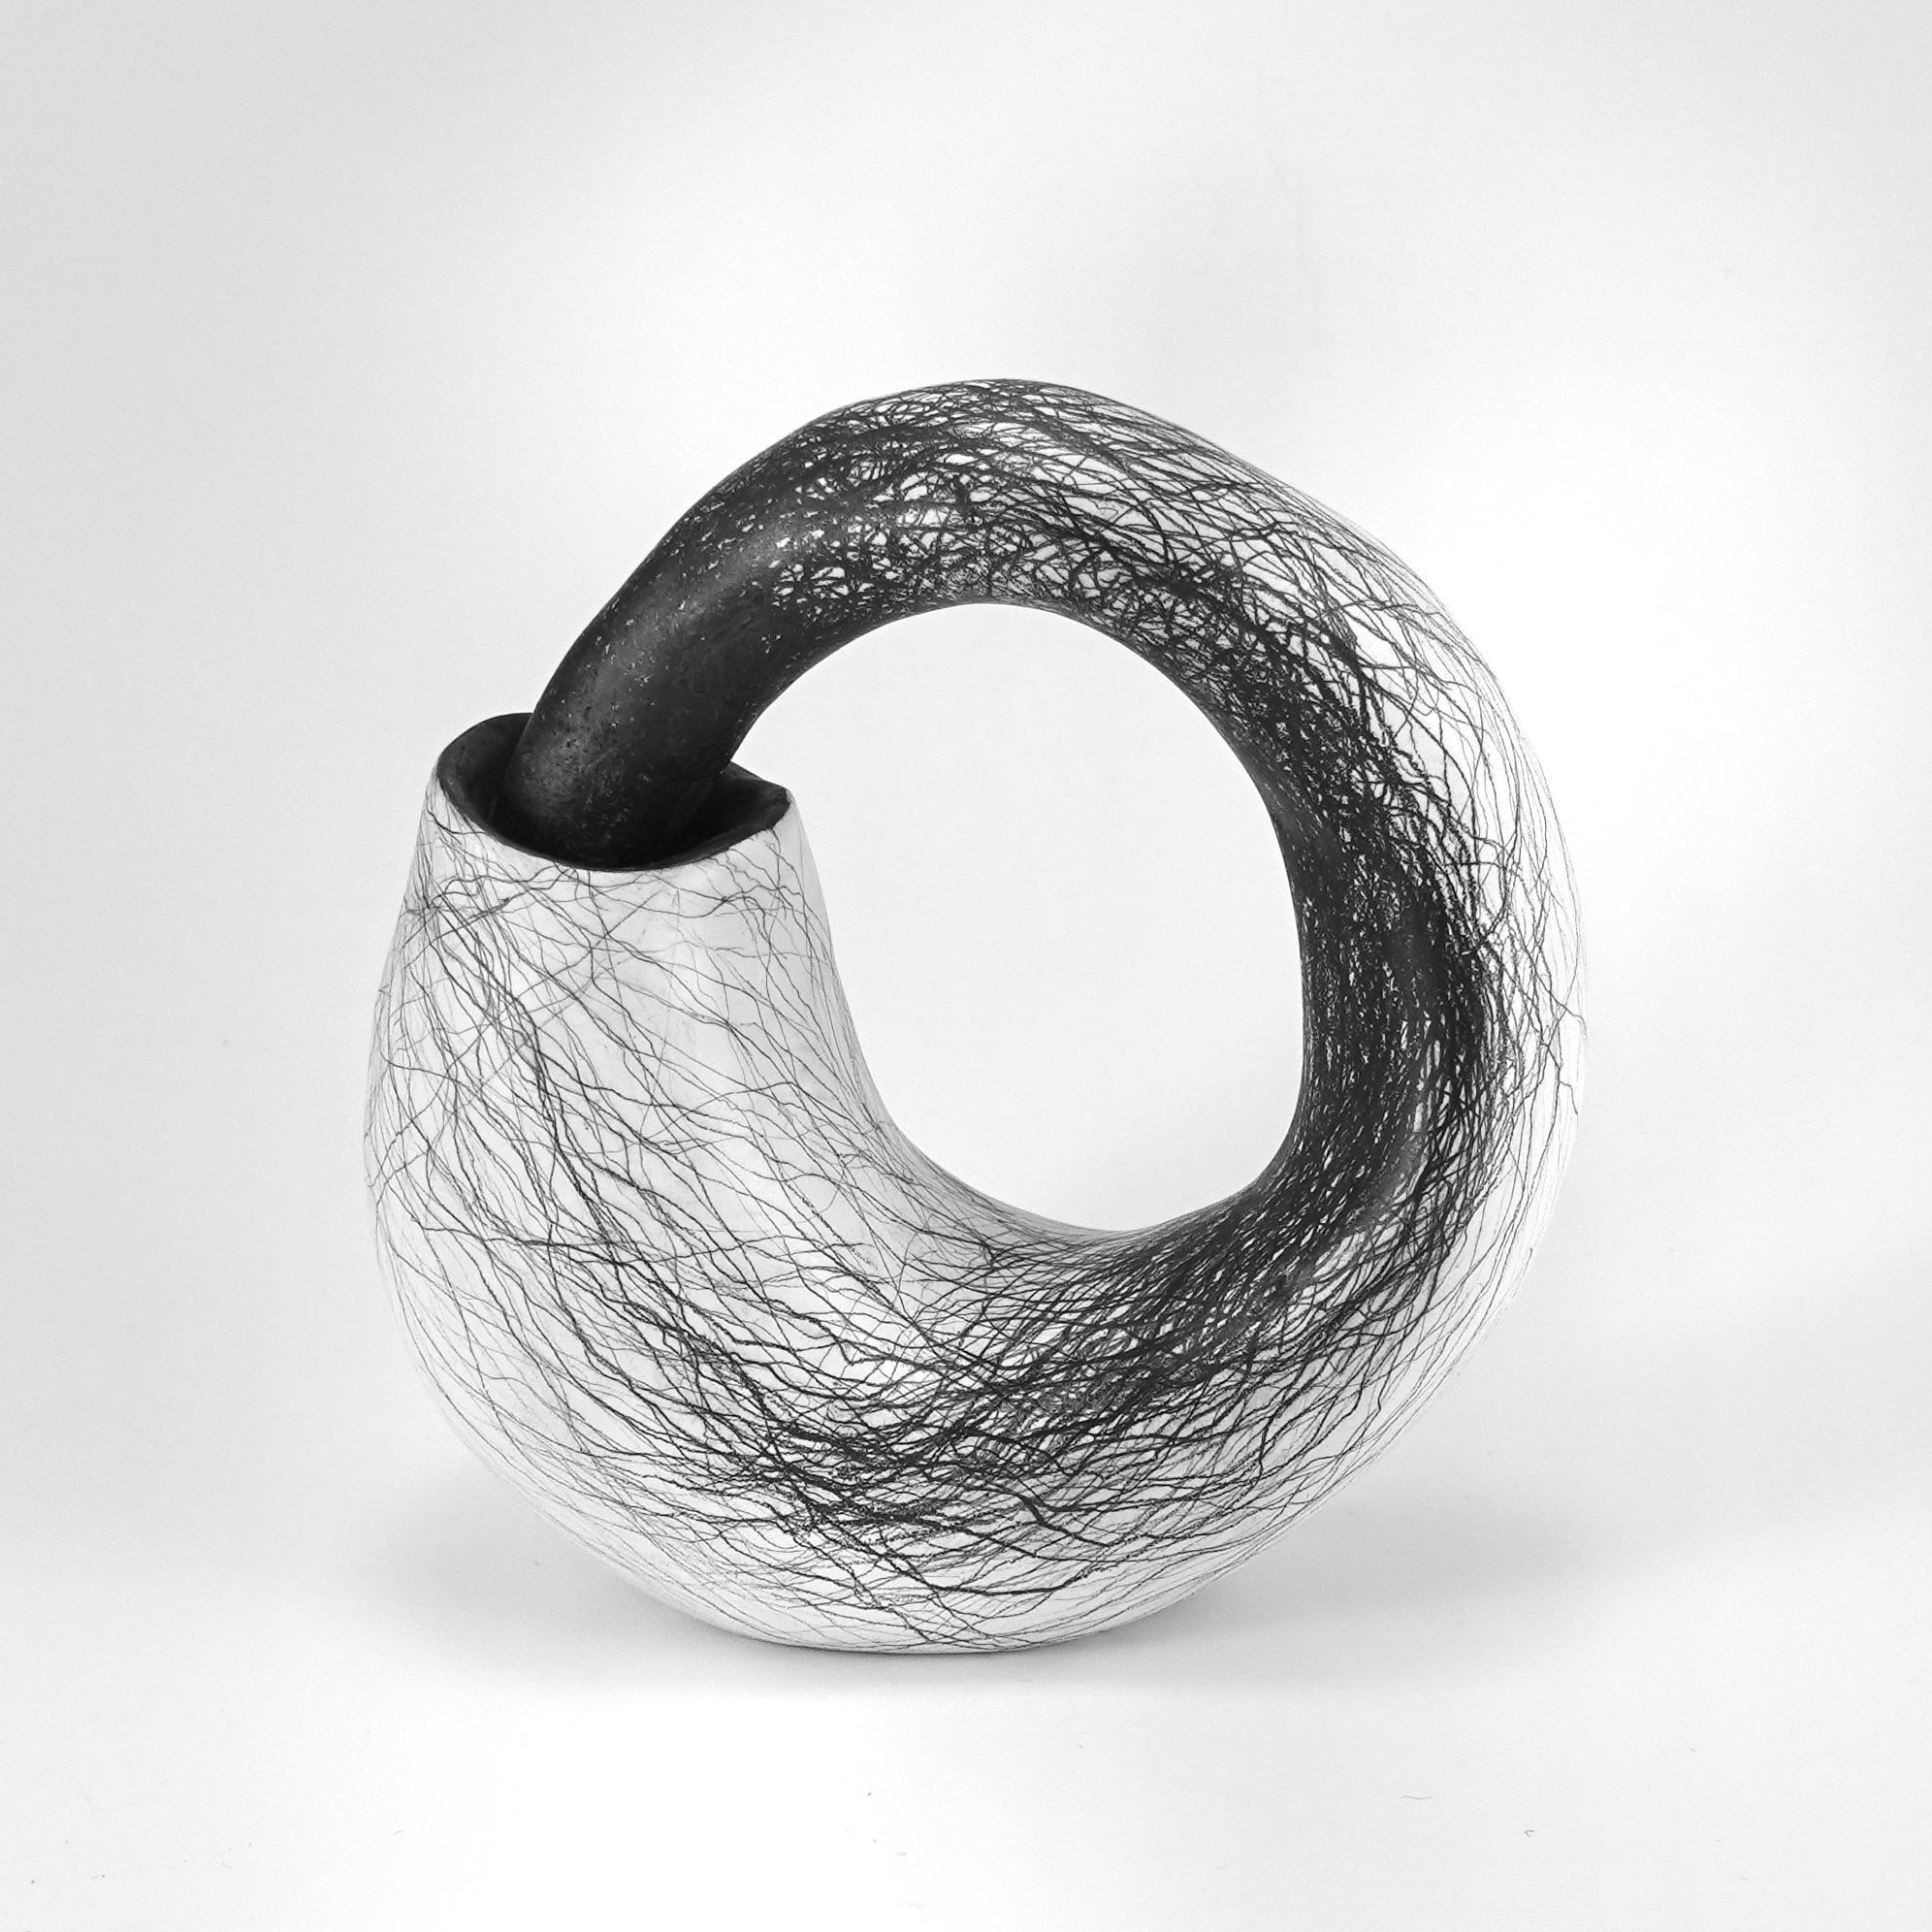 Judi Tavill Abstract Sculpture - Minimal abstract, black and white sculpture: 'Curl'